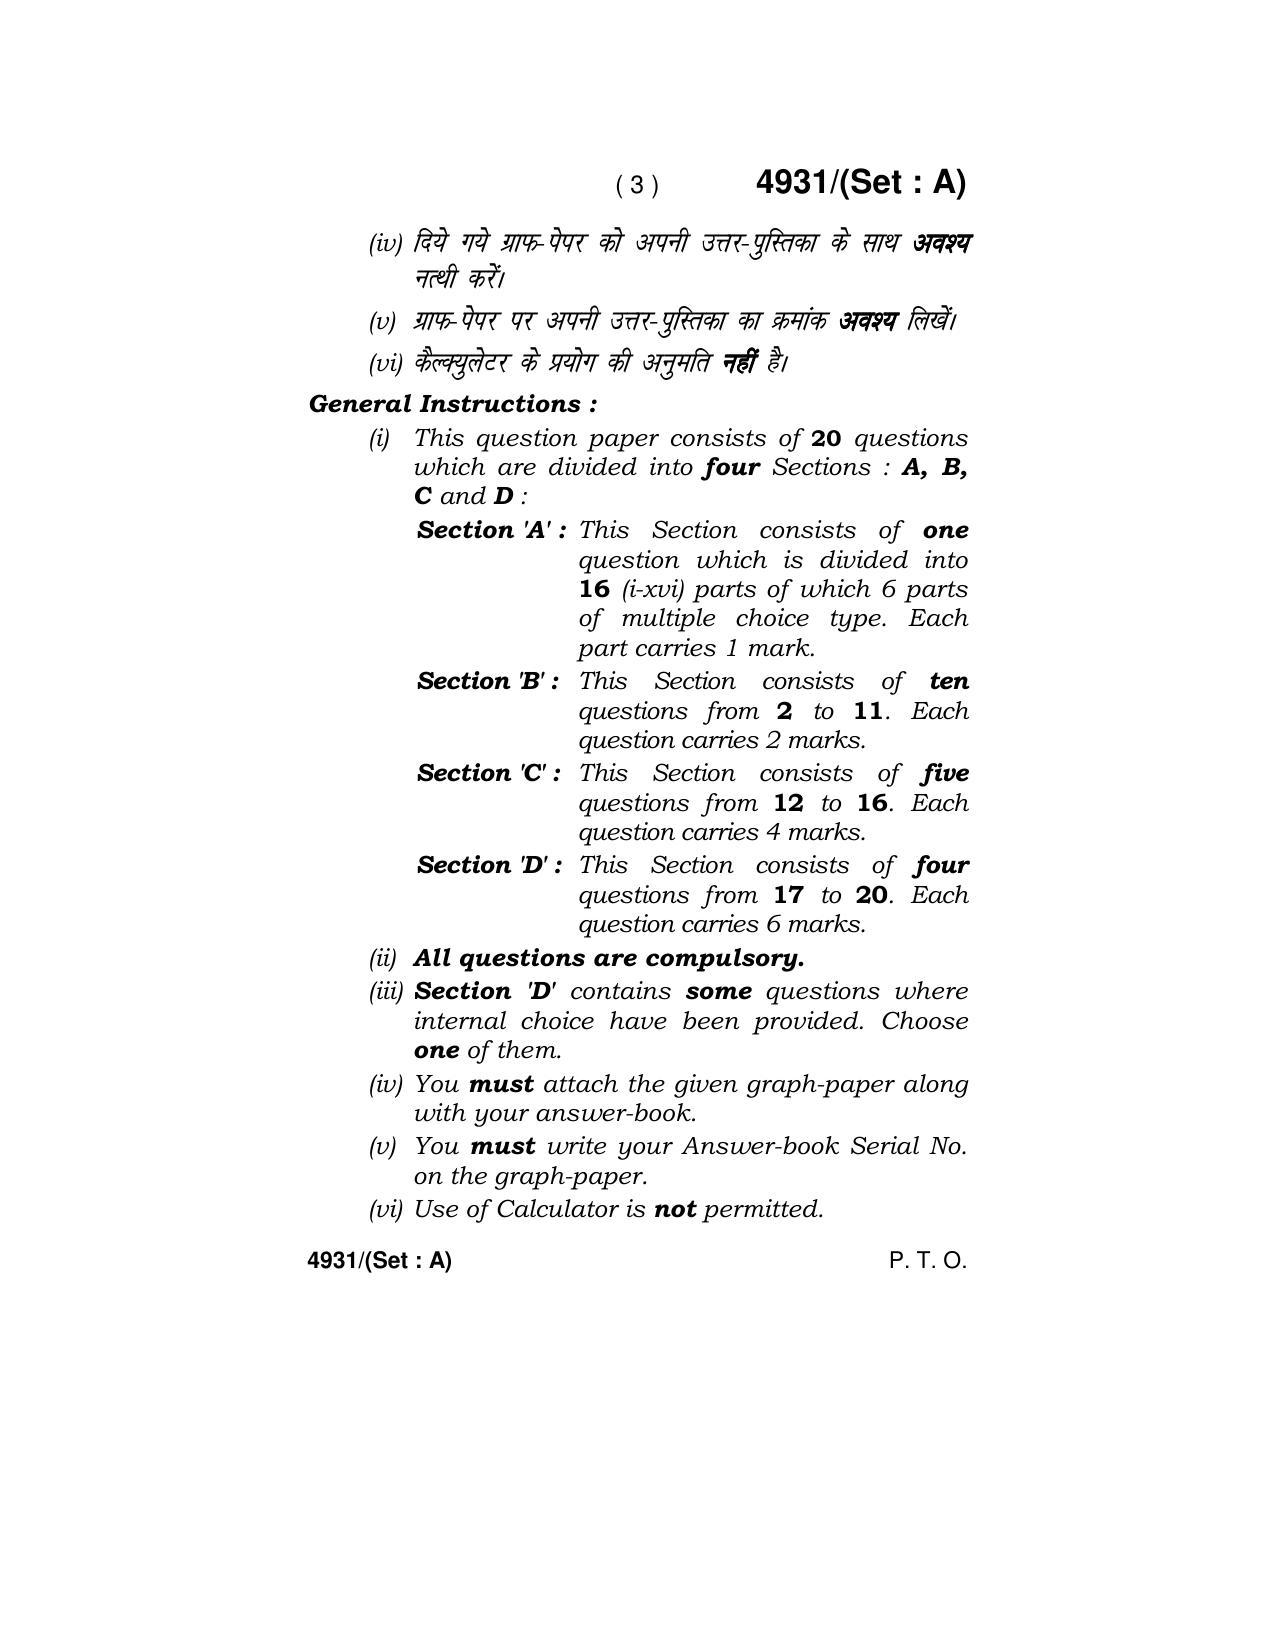 Haryana Board HBSE Class 12 Mathematics 2020 Question Paper - Page 3